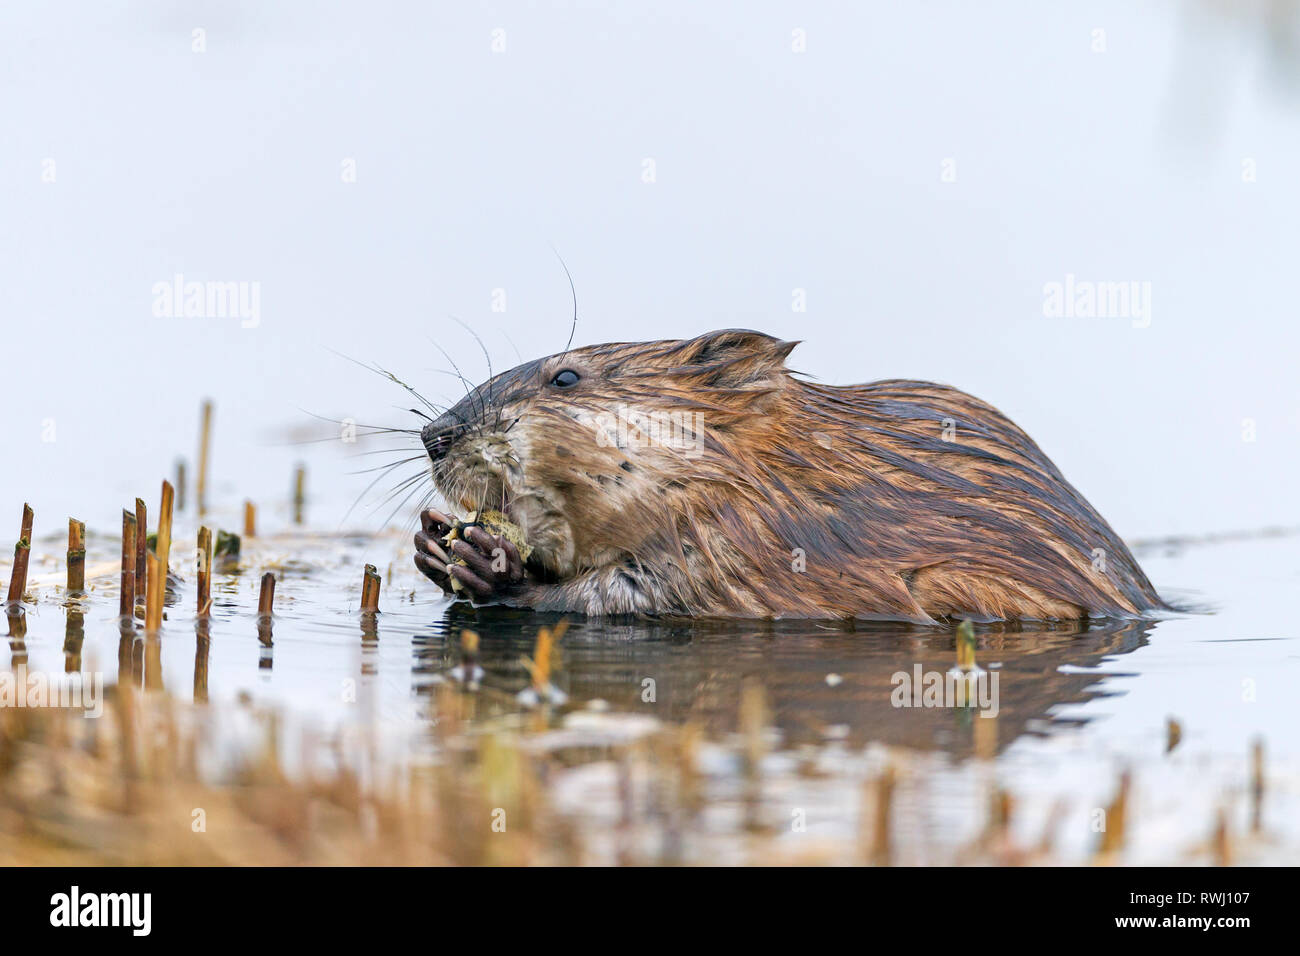 Muskrat (Ondatra zibethicus) at the wateres edge, eating reed roots. Germany Stock Photo